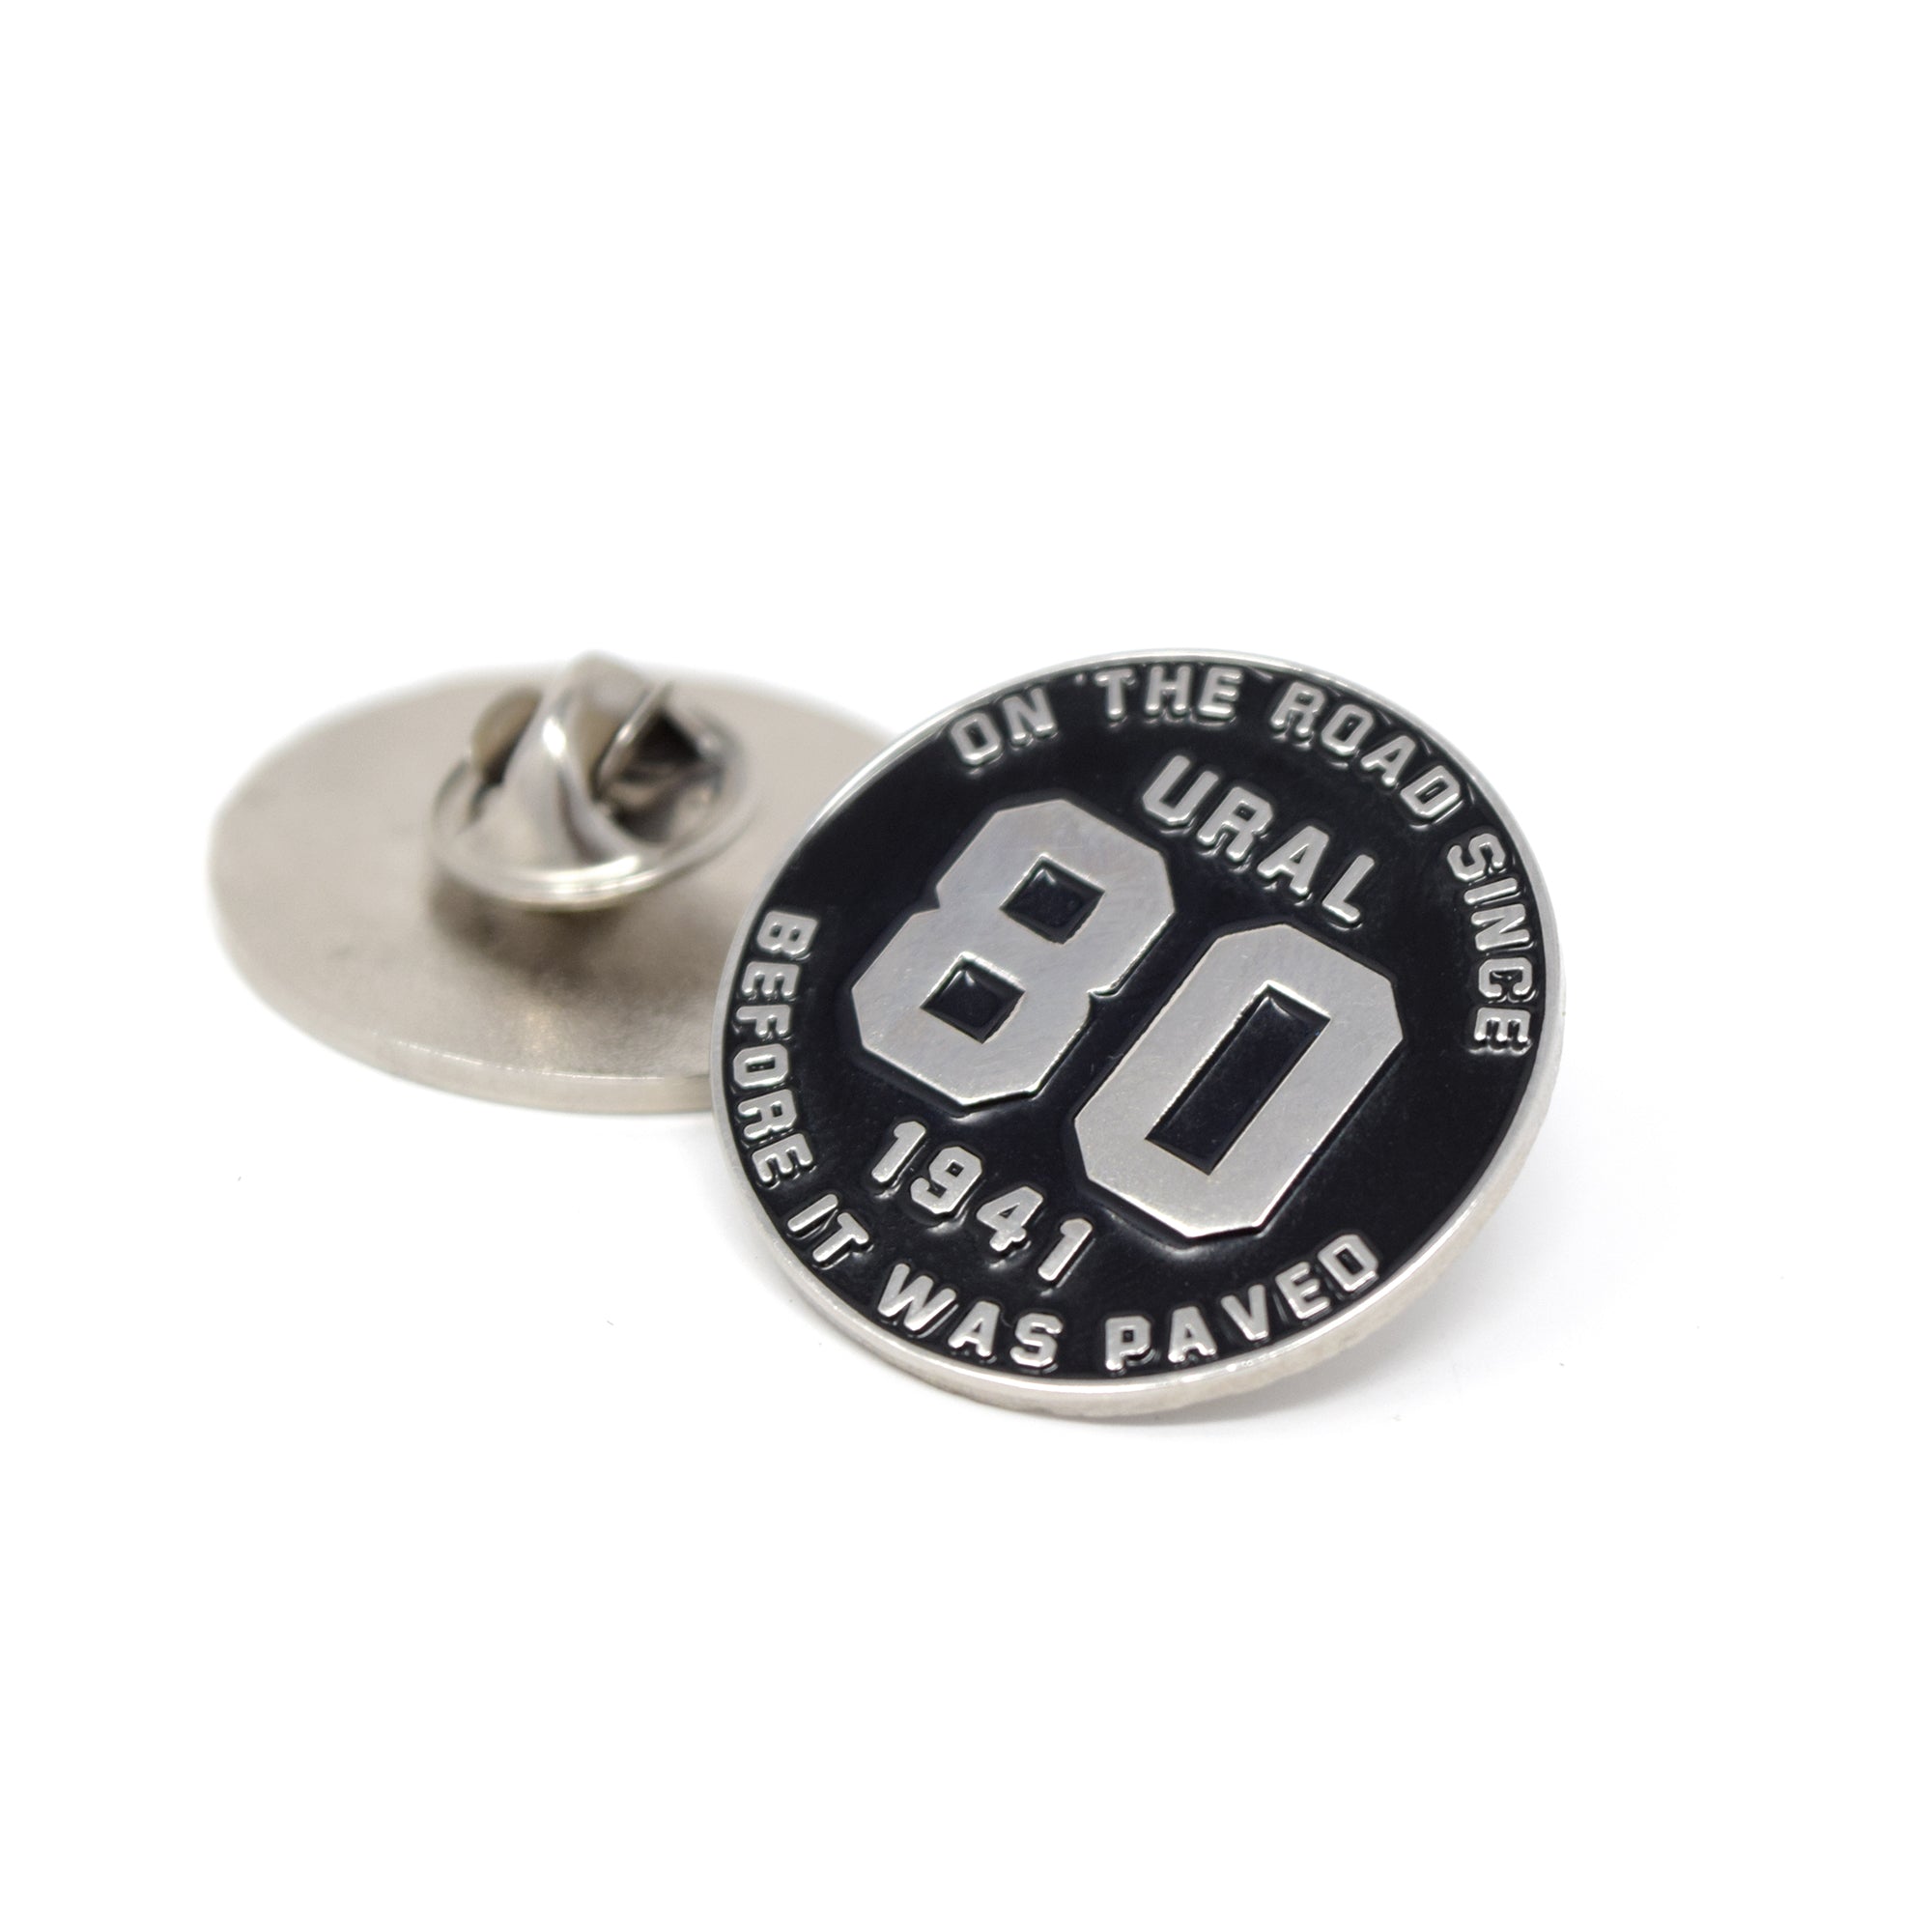 CLEARANCE! 80th Anniversary Pin